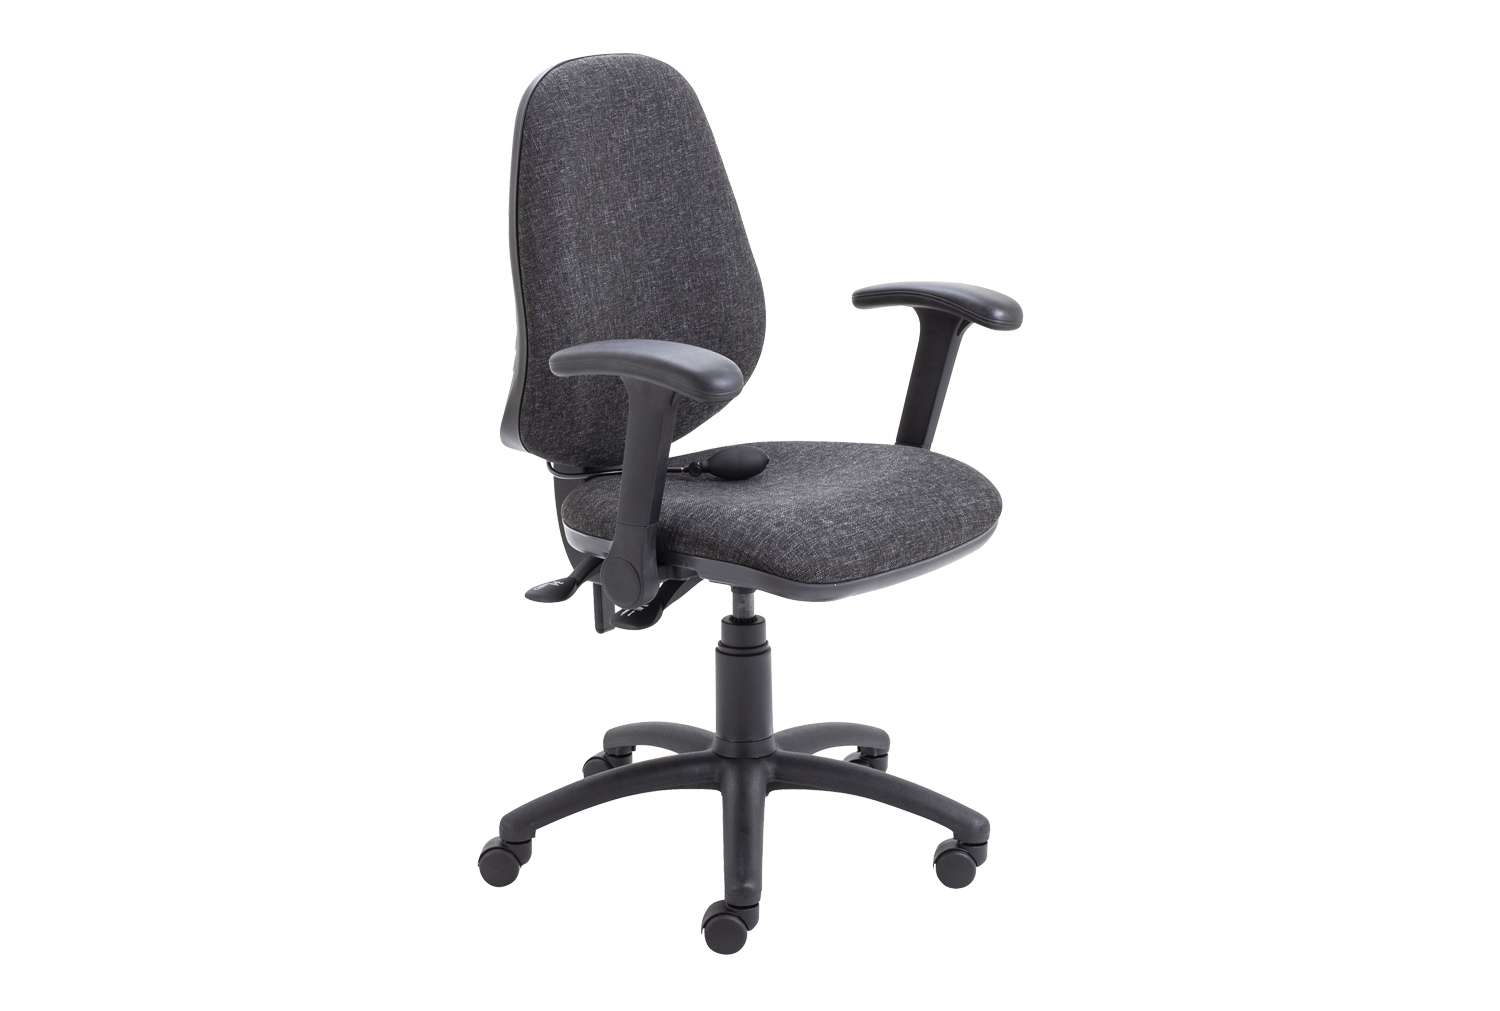 Orchid Lumbar Pump Ergonomic Operator Office Chair With Folding Arms, Charcoal, Express Delivery